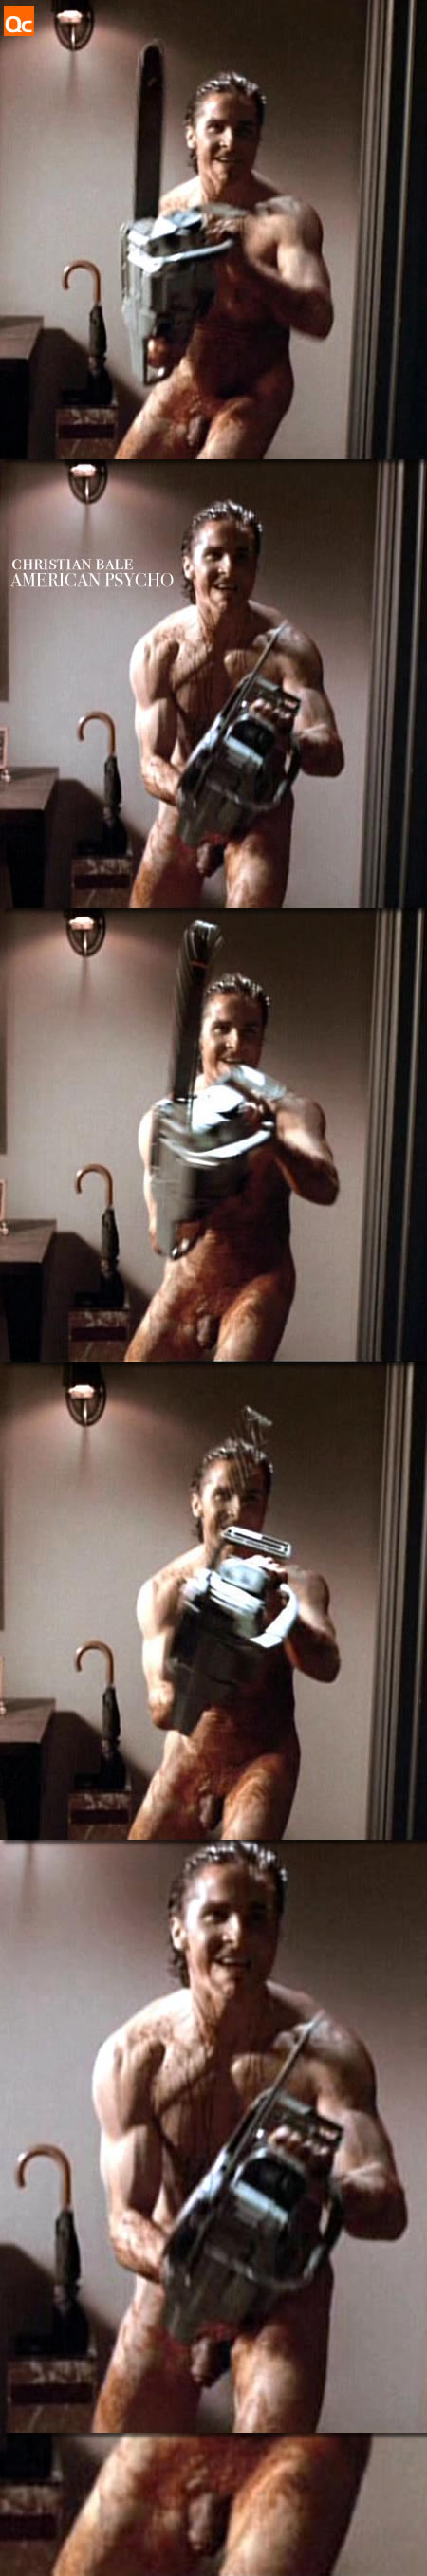 Christian Bale full frontal nude